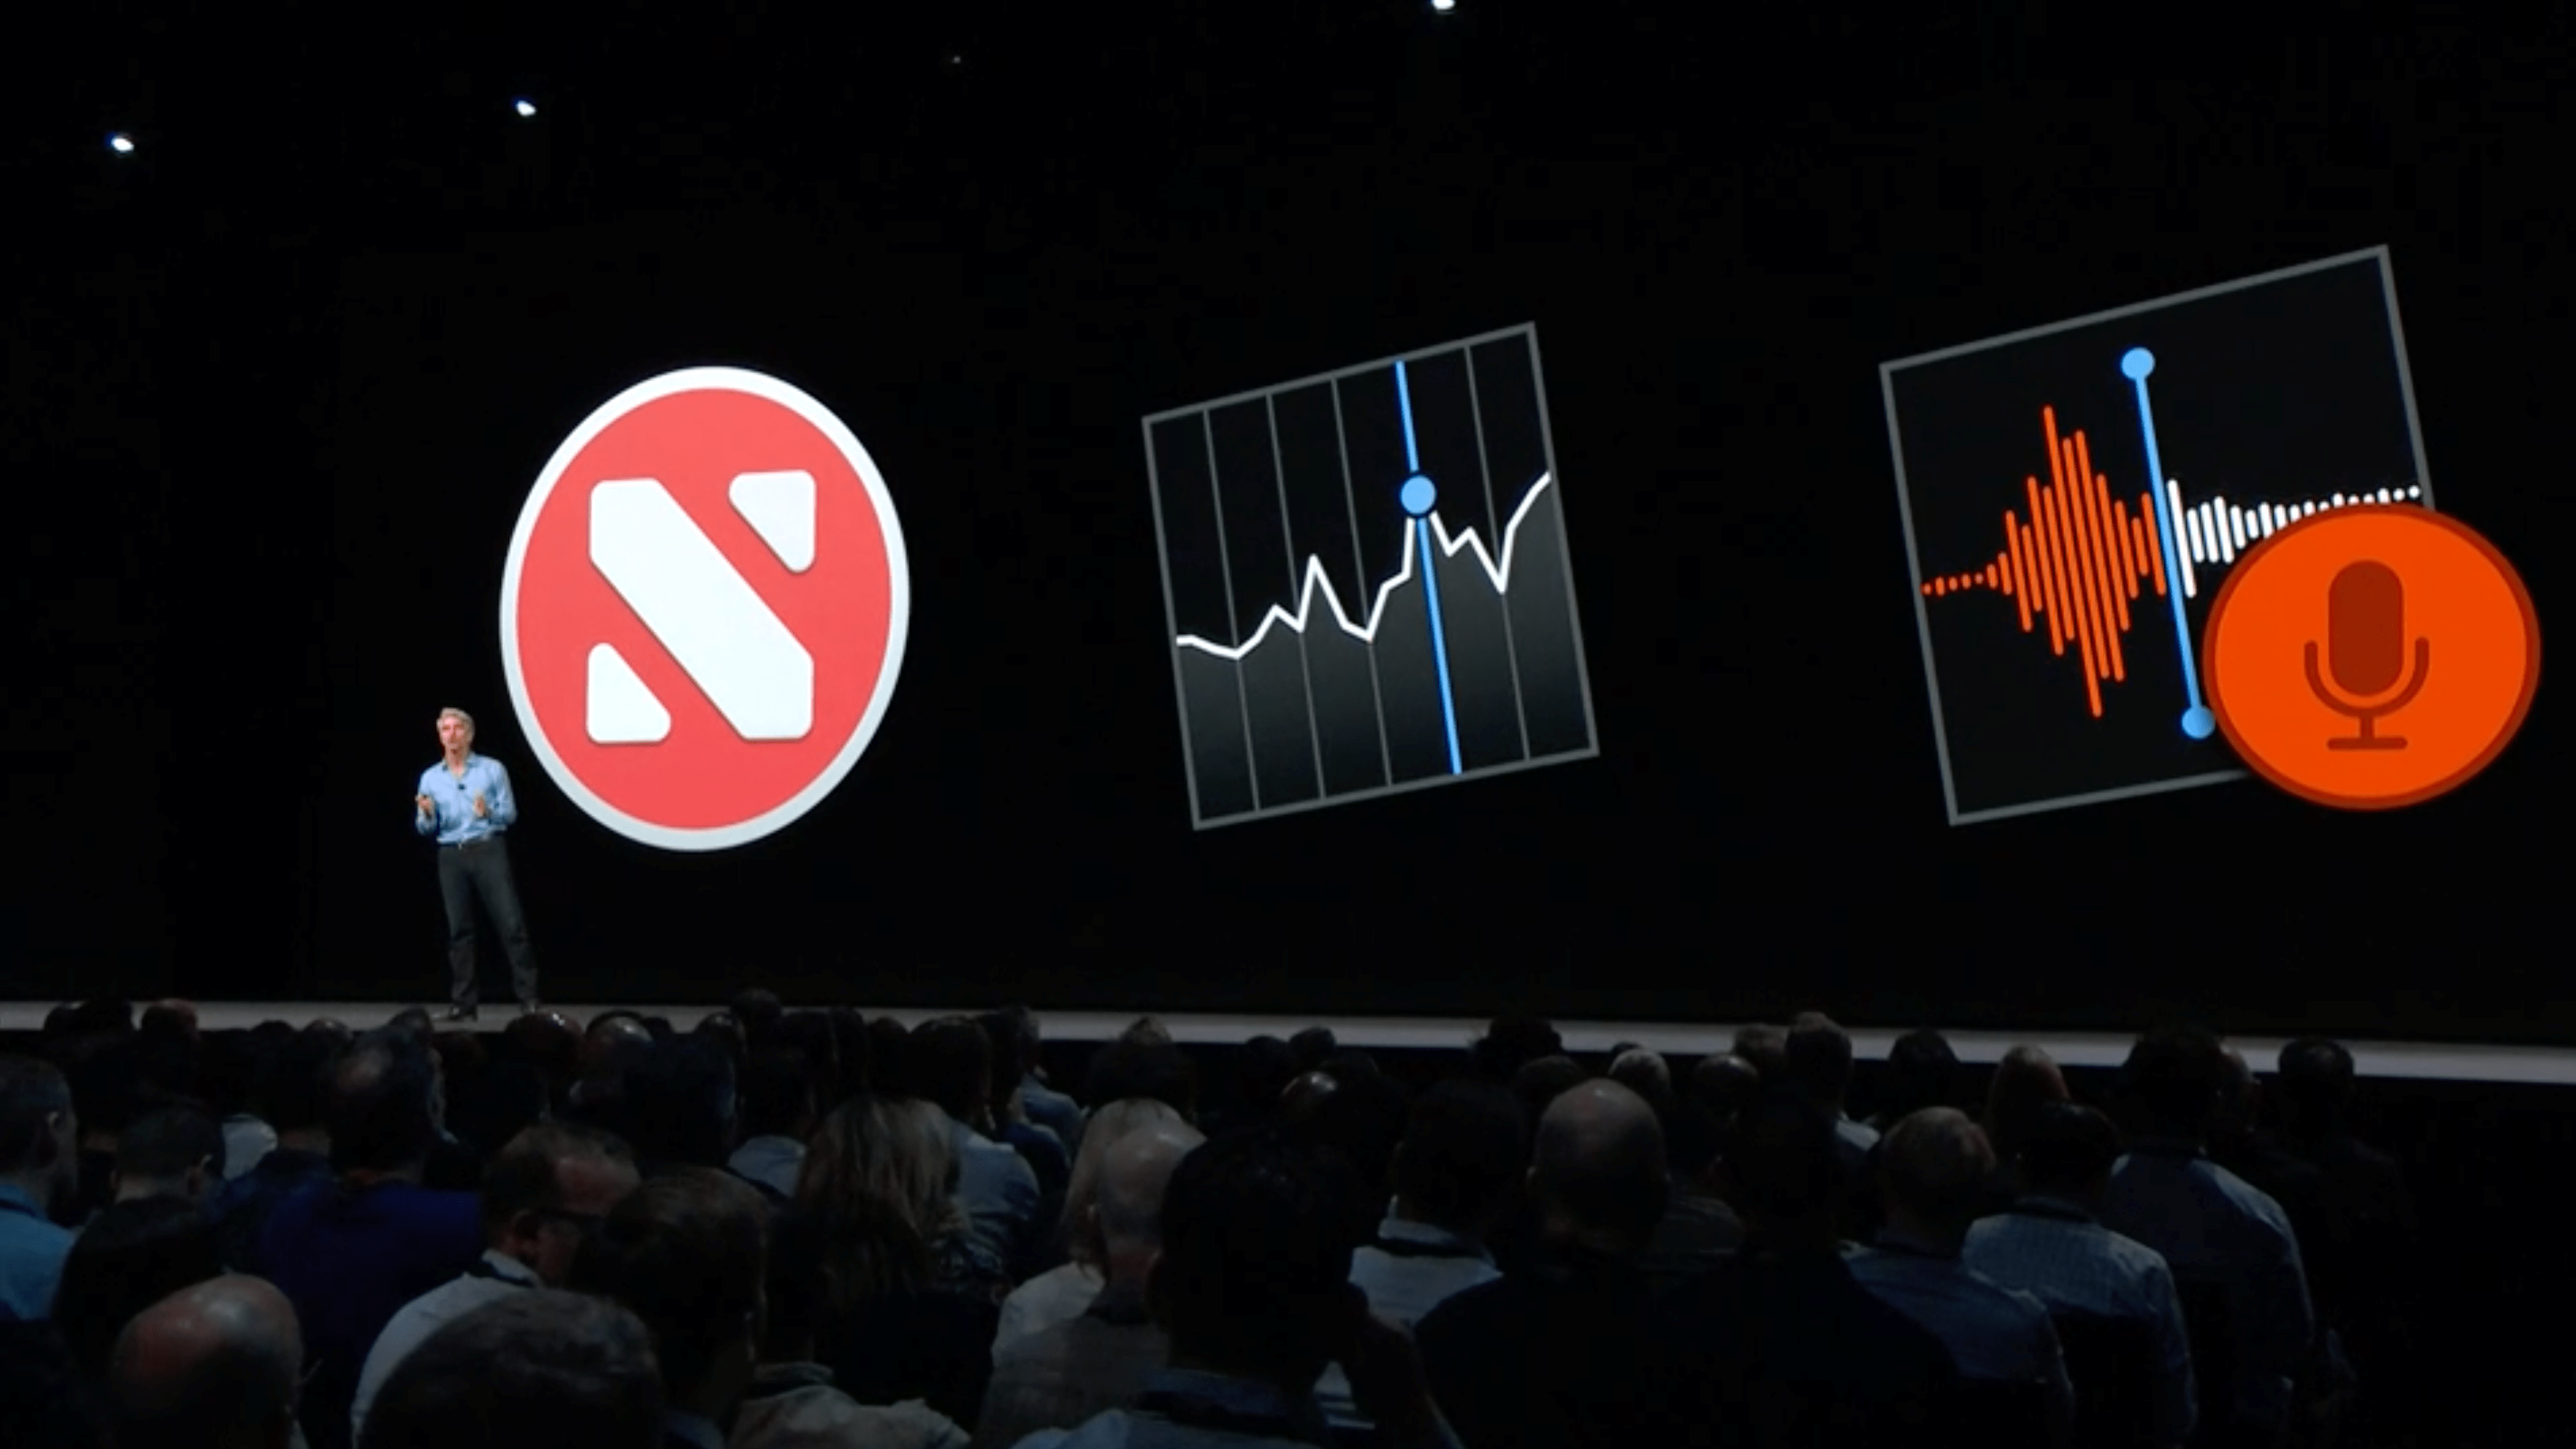 Mac's News, Home, Stocks, and Voice Memos Will Be Improved